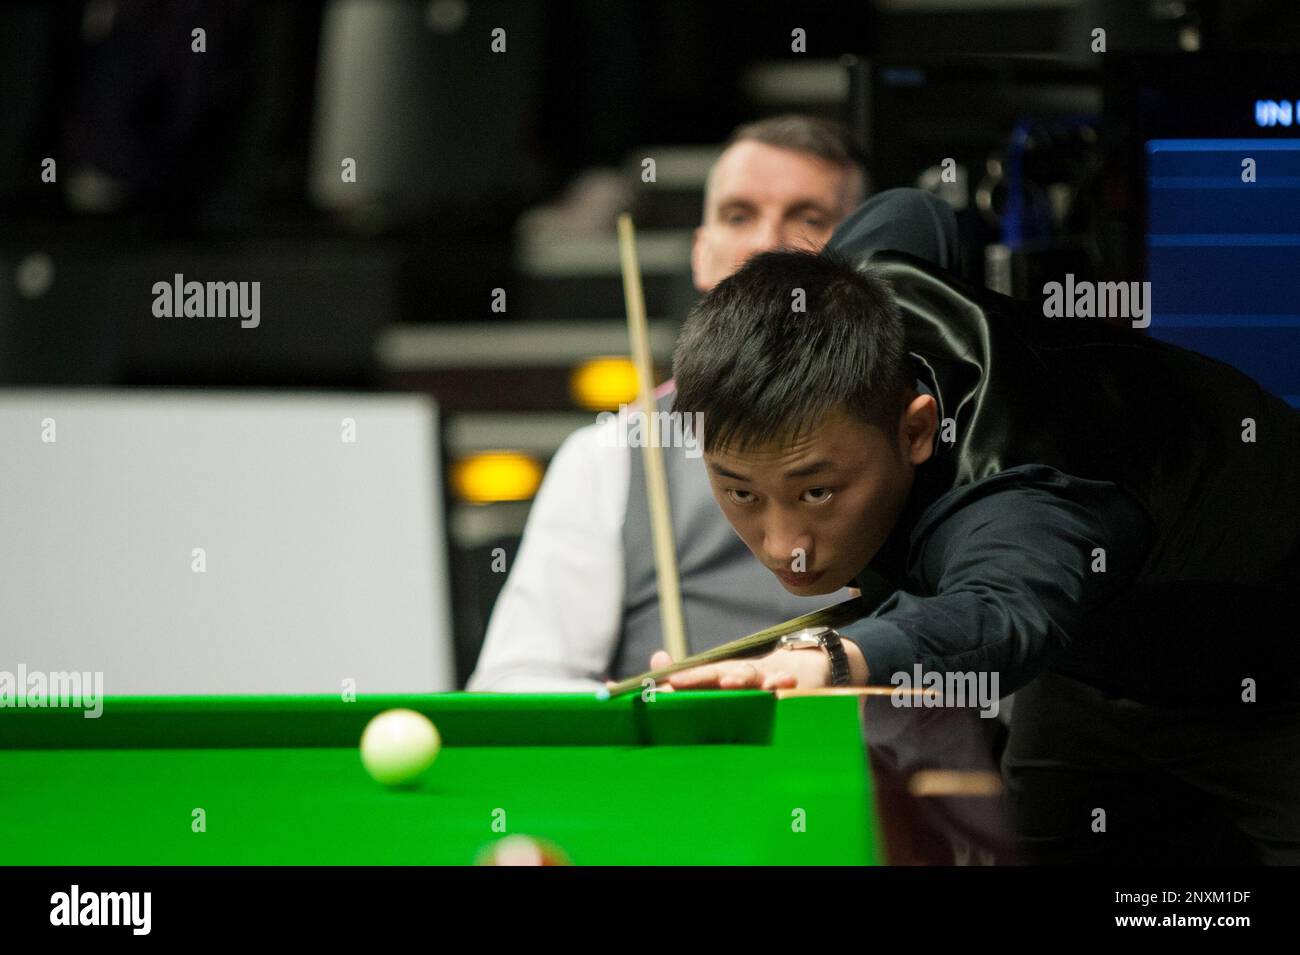 Mark Davis of England plays a shot to Niu Zhuang of China in their first round match during the 2018 D88 German Masters snooker tournament in Berlin, Germany, 1 February 2018.Mark Davis